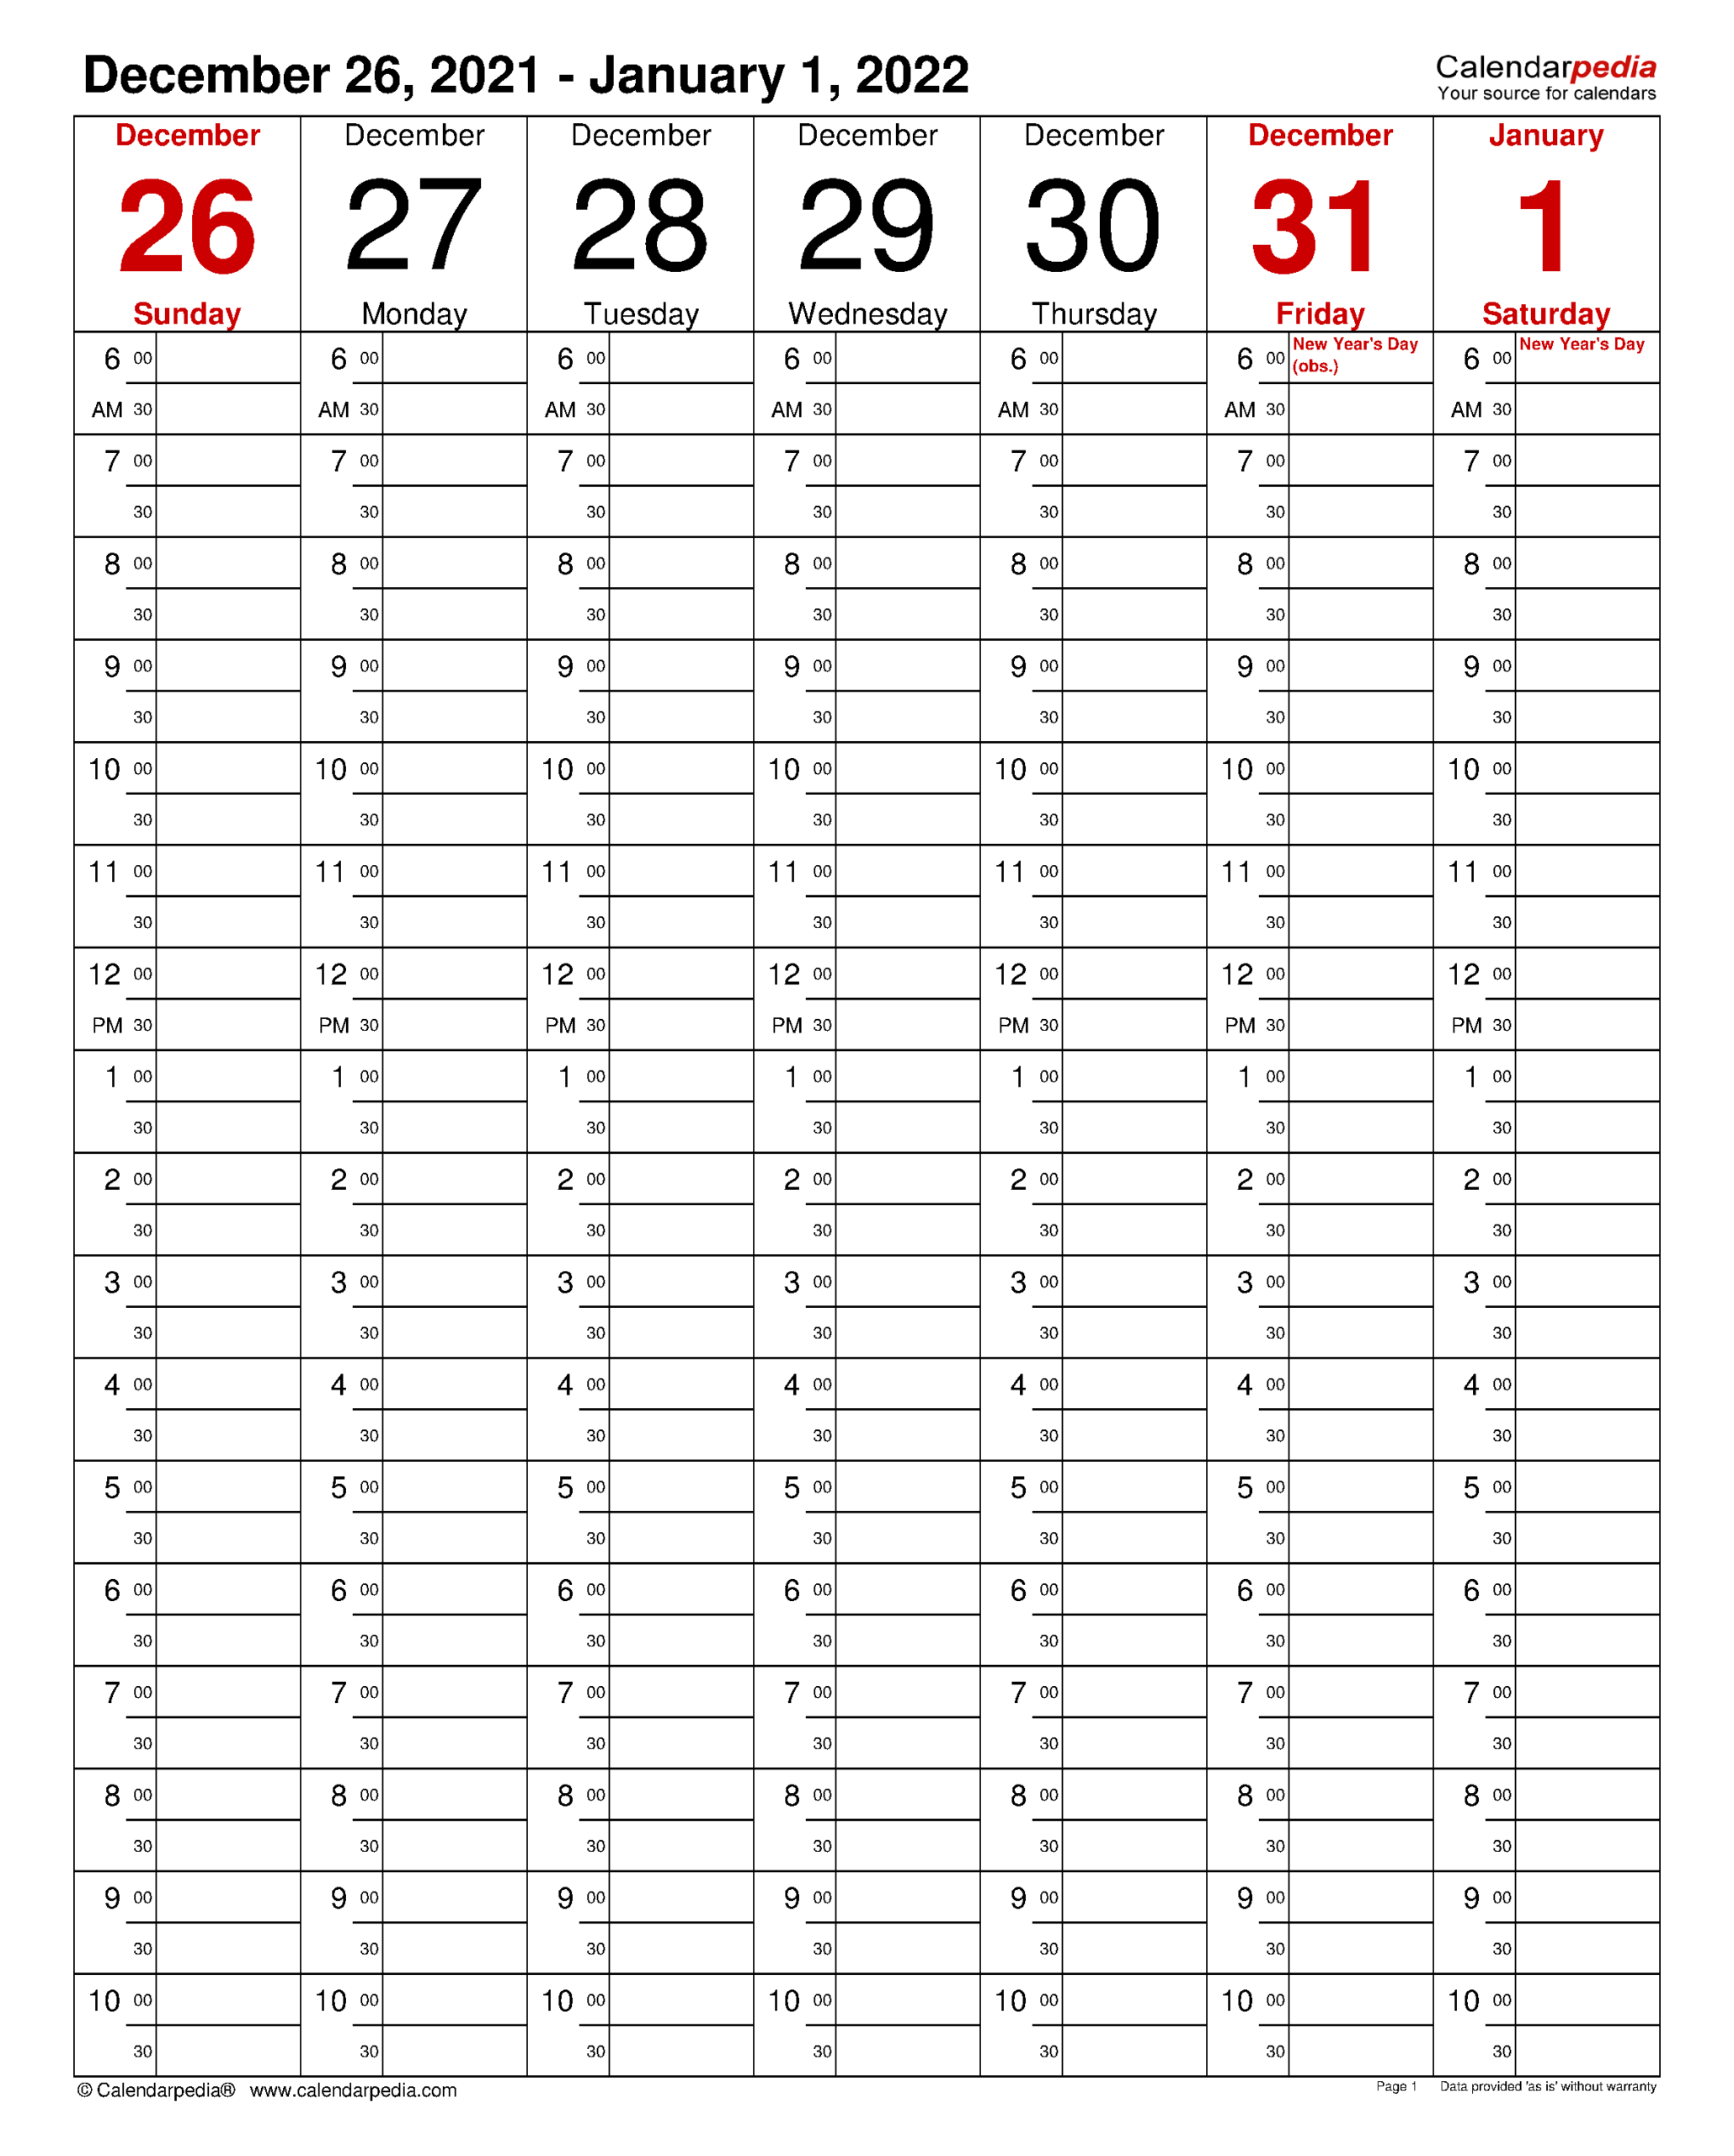 Weekly Calendars 2022 For Pdf - 12 Free Printable Templates-2021 Monthly Calendar With Time Slots